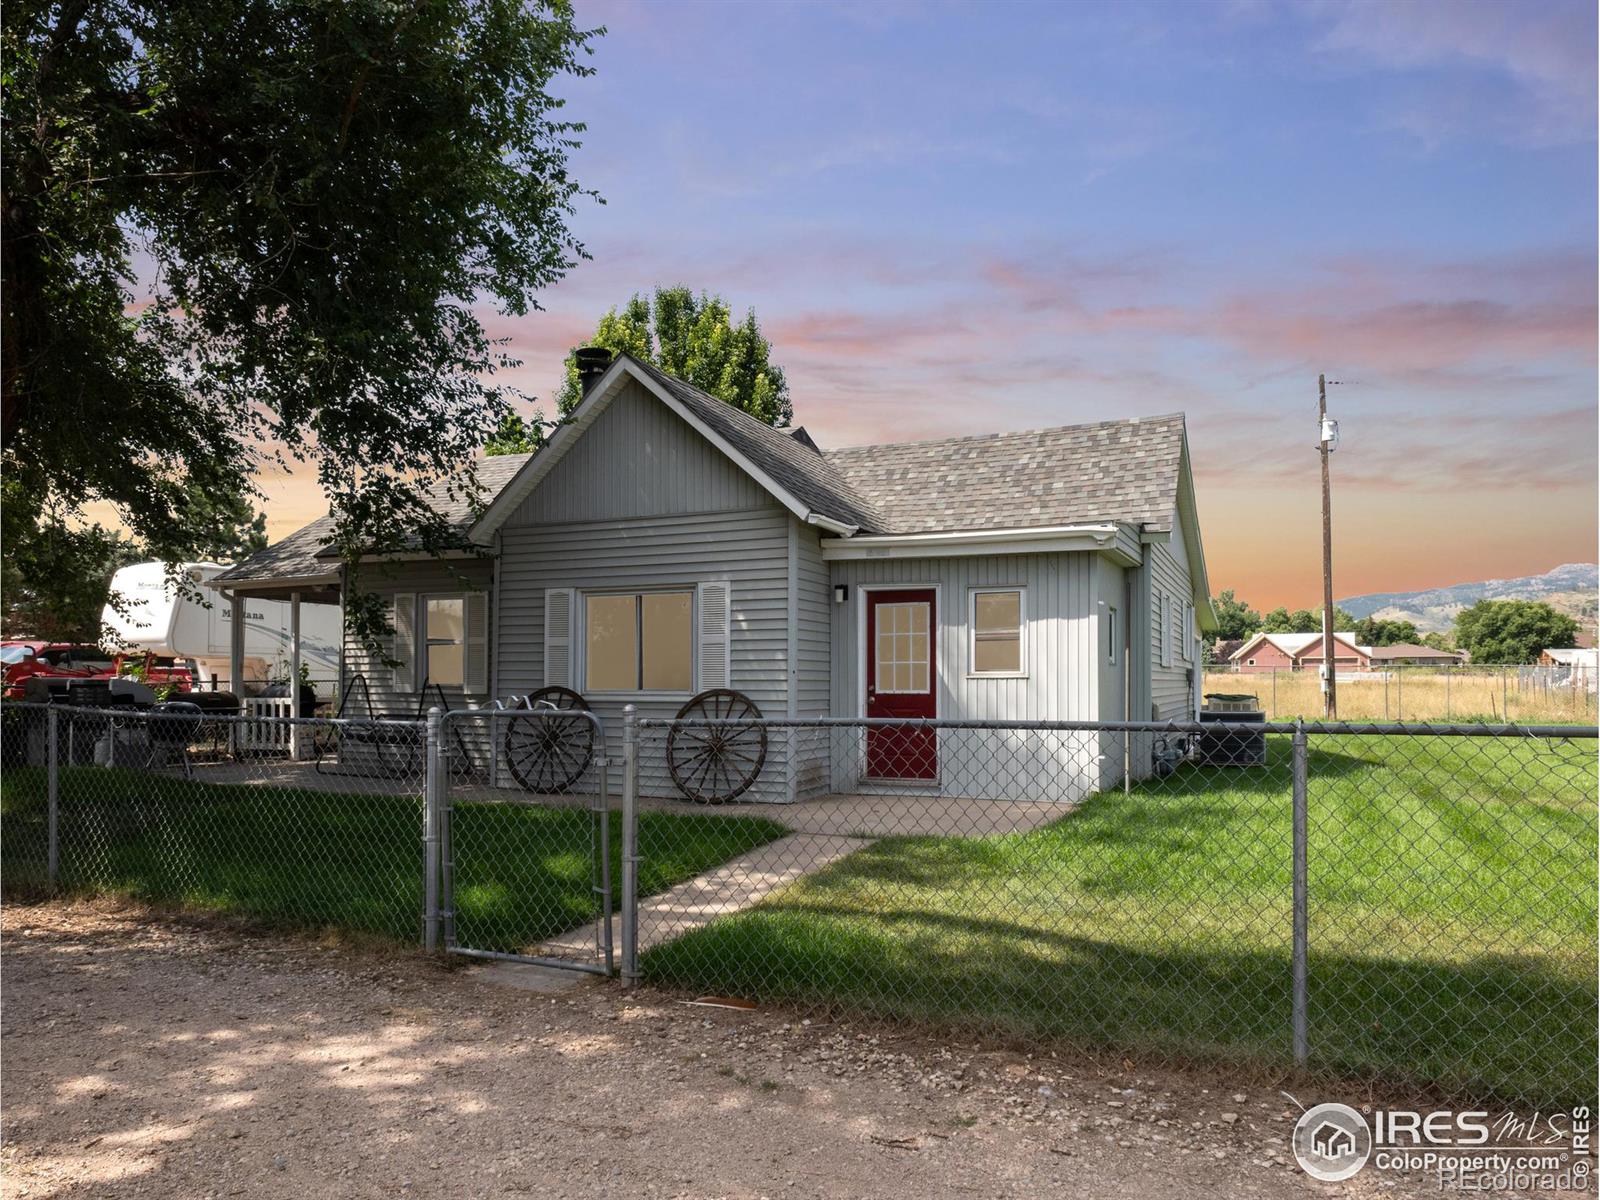 Report Image for 2127 W County Road 38 E ,Fort Collins, Colorado